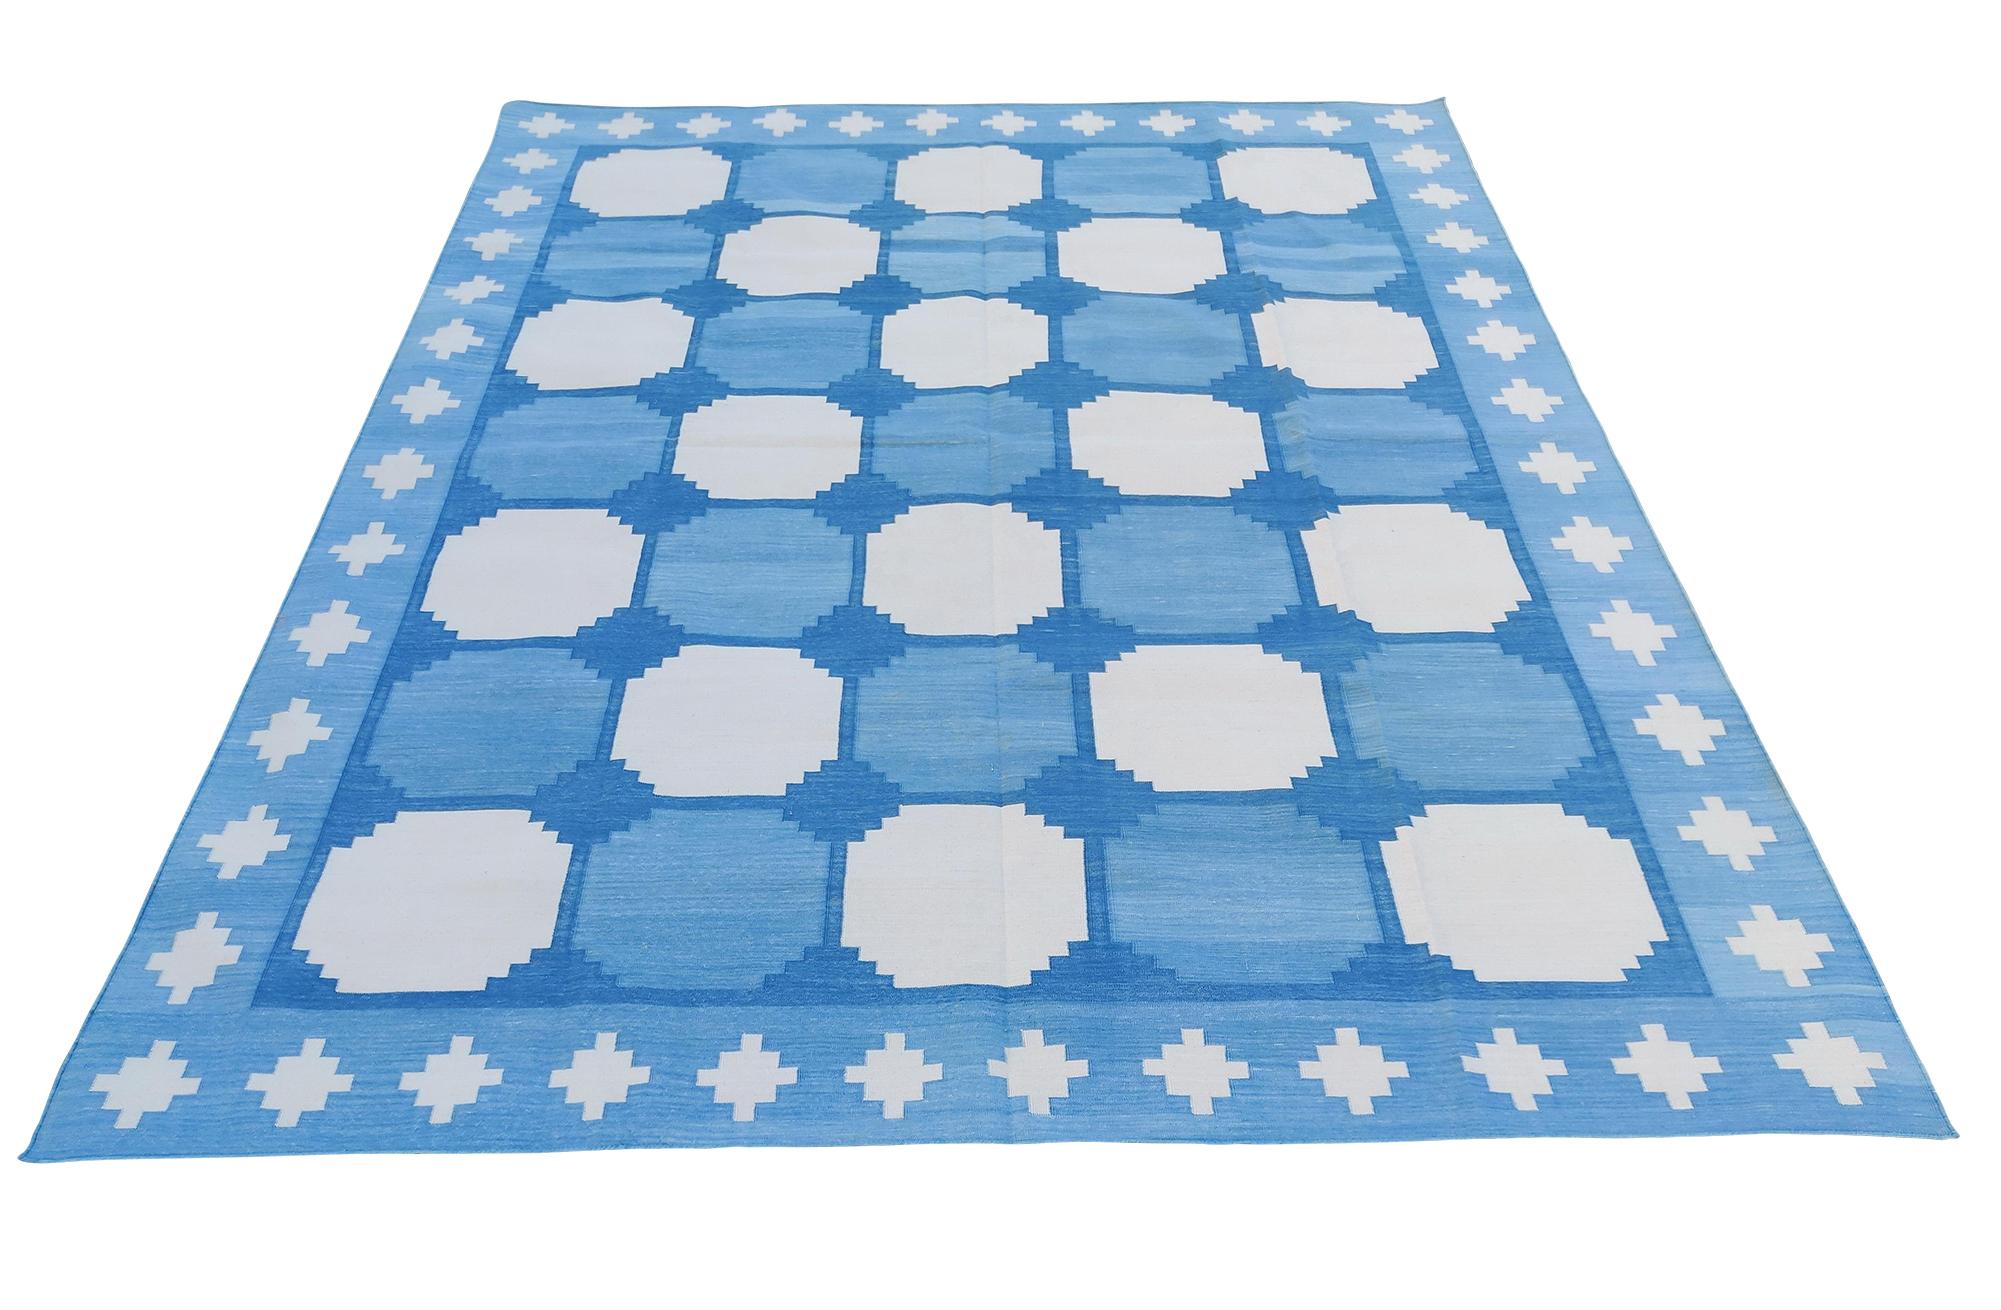 Cotton Natural Vegetable Dyed, Sky Blue And Cream Tile Patterned Rug-6'x9'
These special flat-weave dhurries are hand-woven with 15 ply 100% cotton yarn. Due to the special manufacturing techniques used to create our rugs, the size and color of each